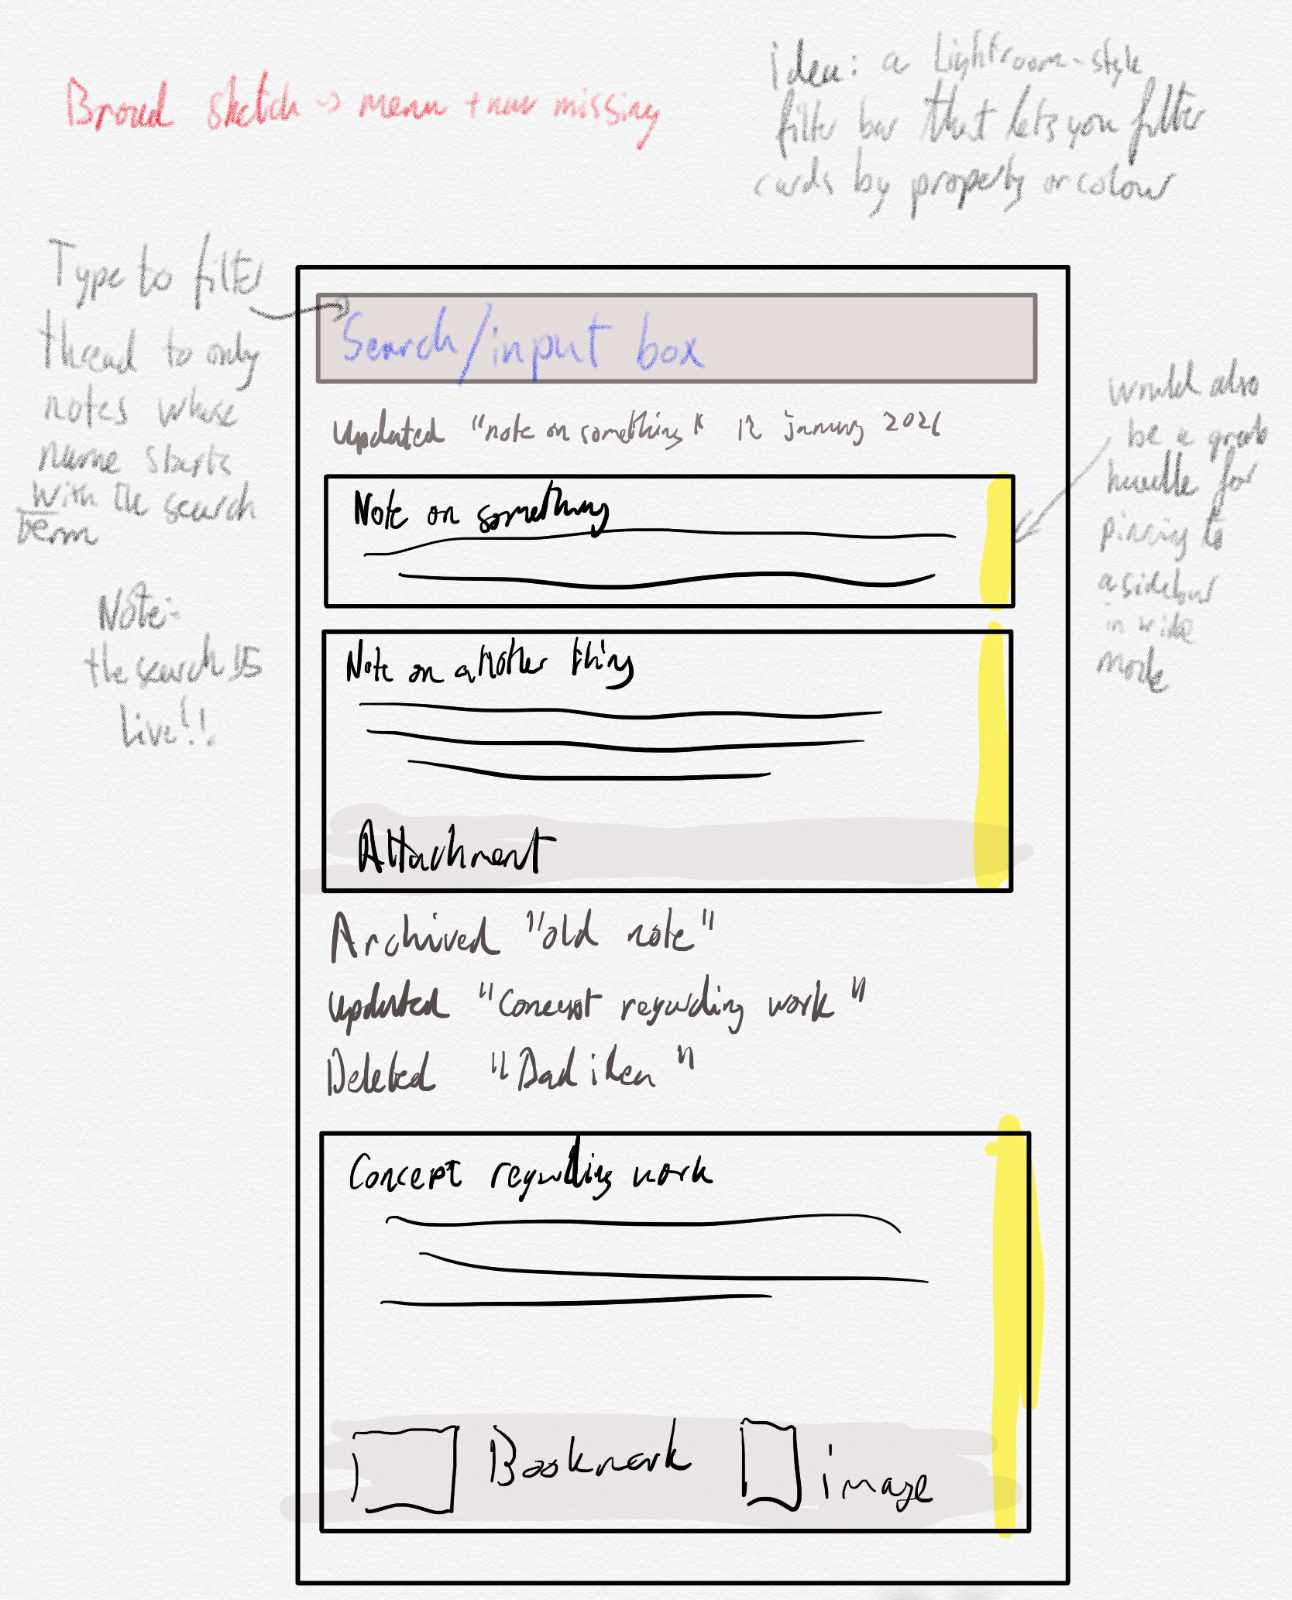 Sketch of how threads might work